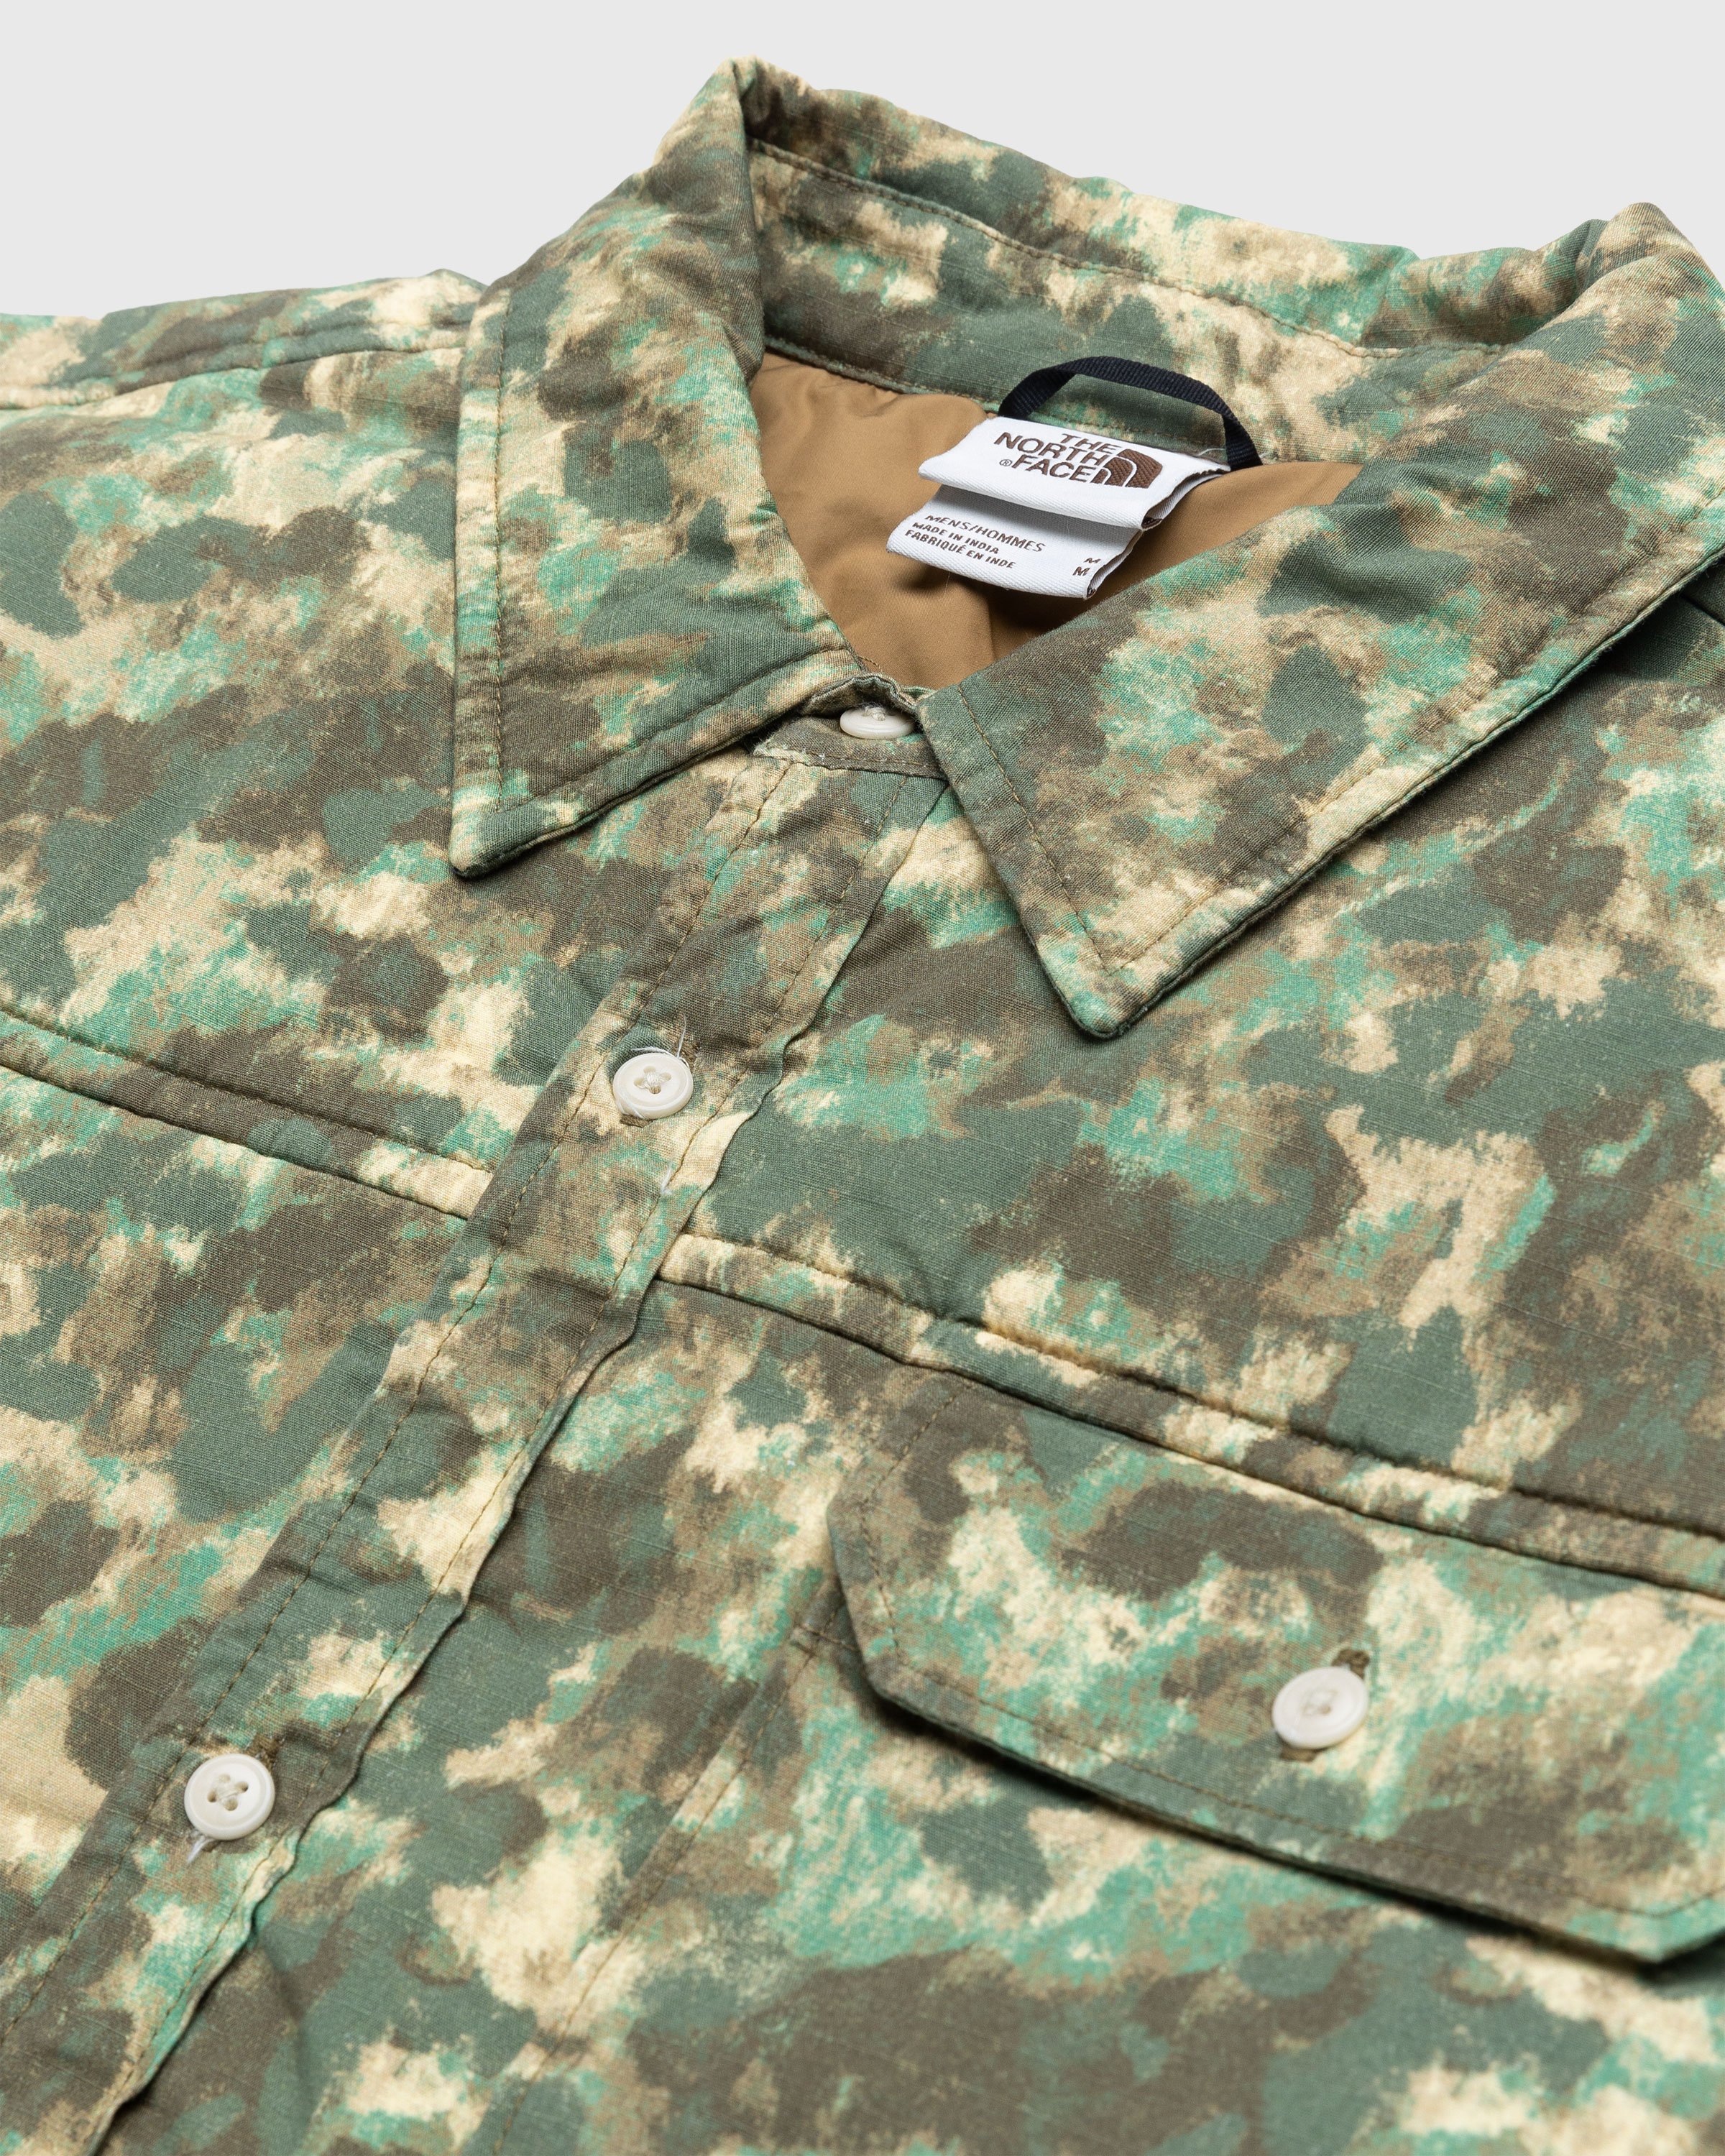 The North Face - M66 Stuffed Shirt Jacket Military Olive/Stippled Camo Print - Clothing - Green - Image 5